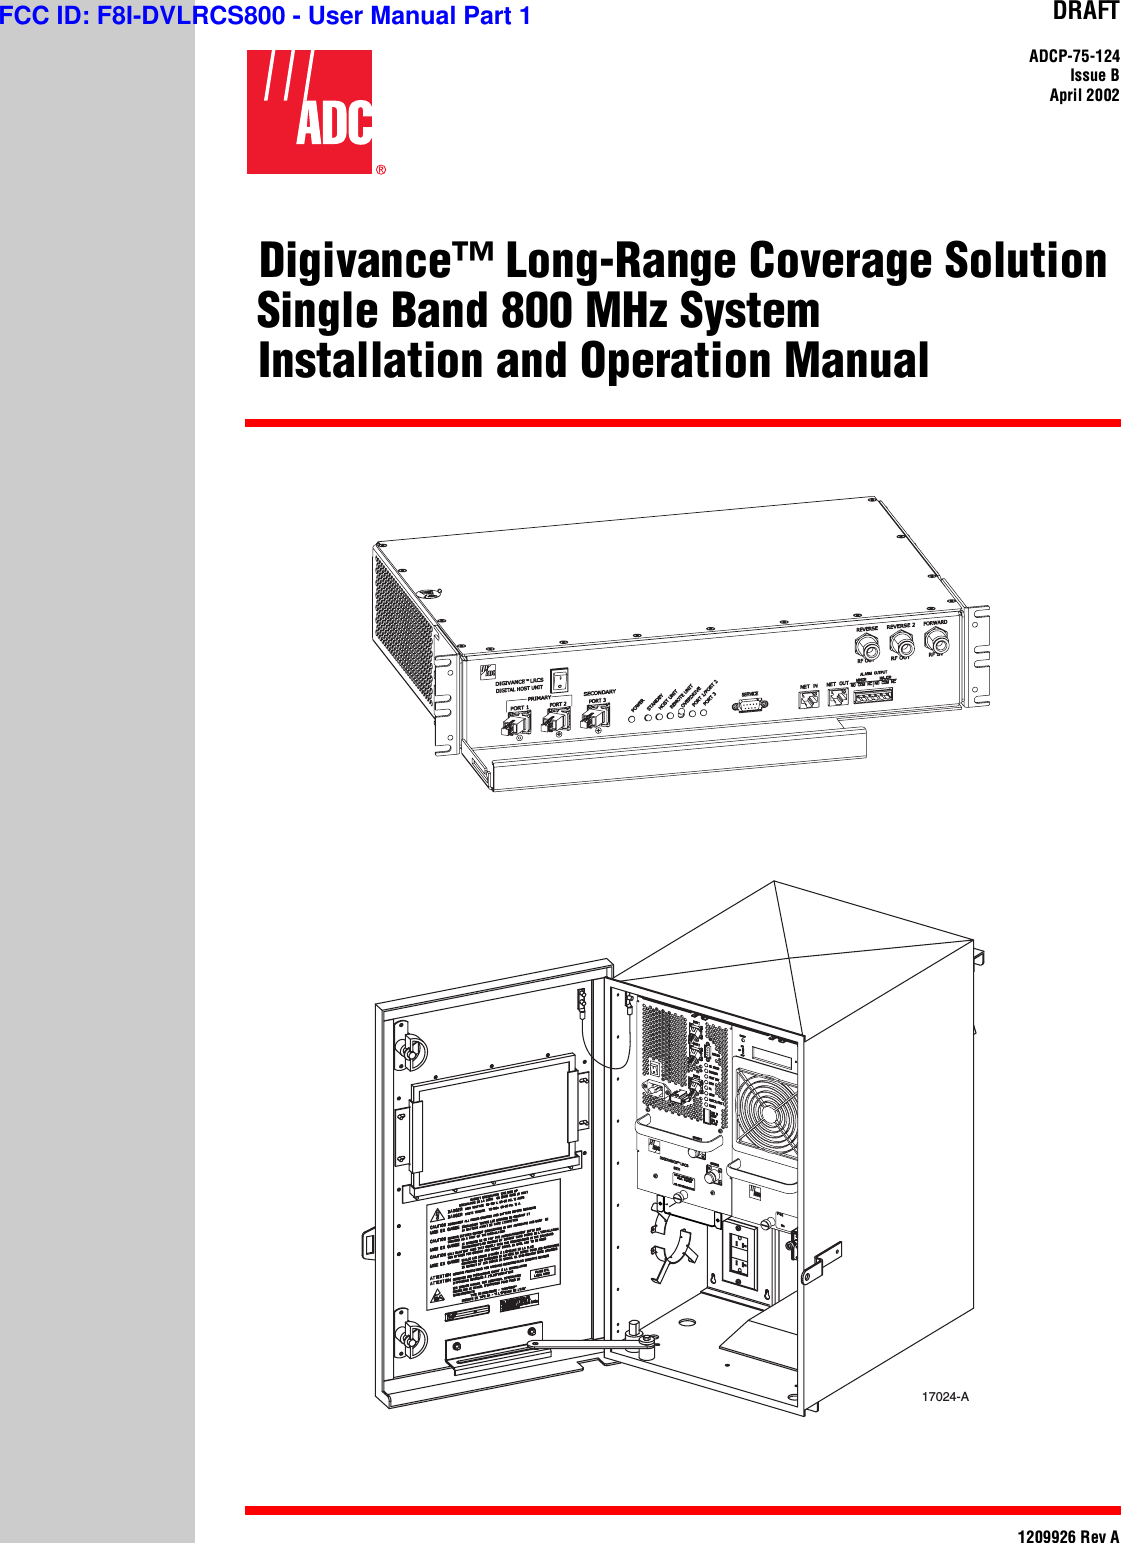 DRAFTADCP-75-124Issue BApril 20021209926 Rev A(Digivance™ Long-Range Coverage Solution Single Band 800 MHz System(Installation and Operation Manual17024-AFCC ID: F8I-DVLRCS800 - User Manual Part 1